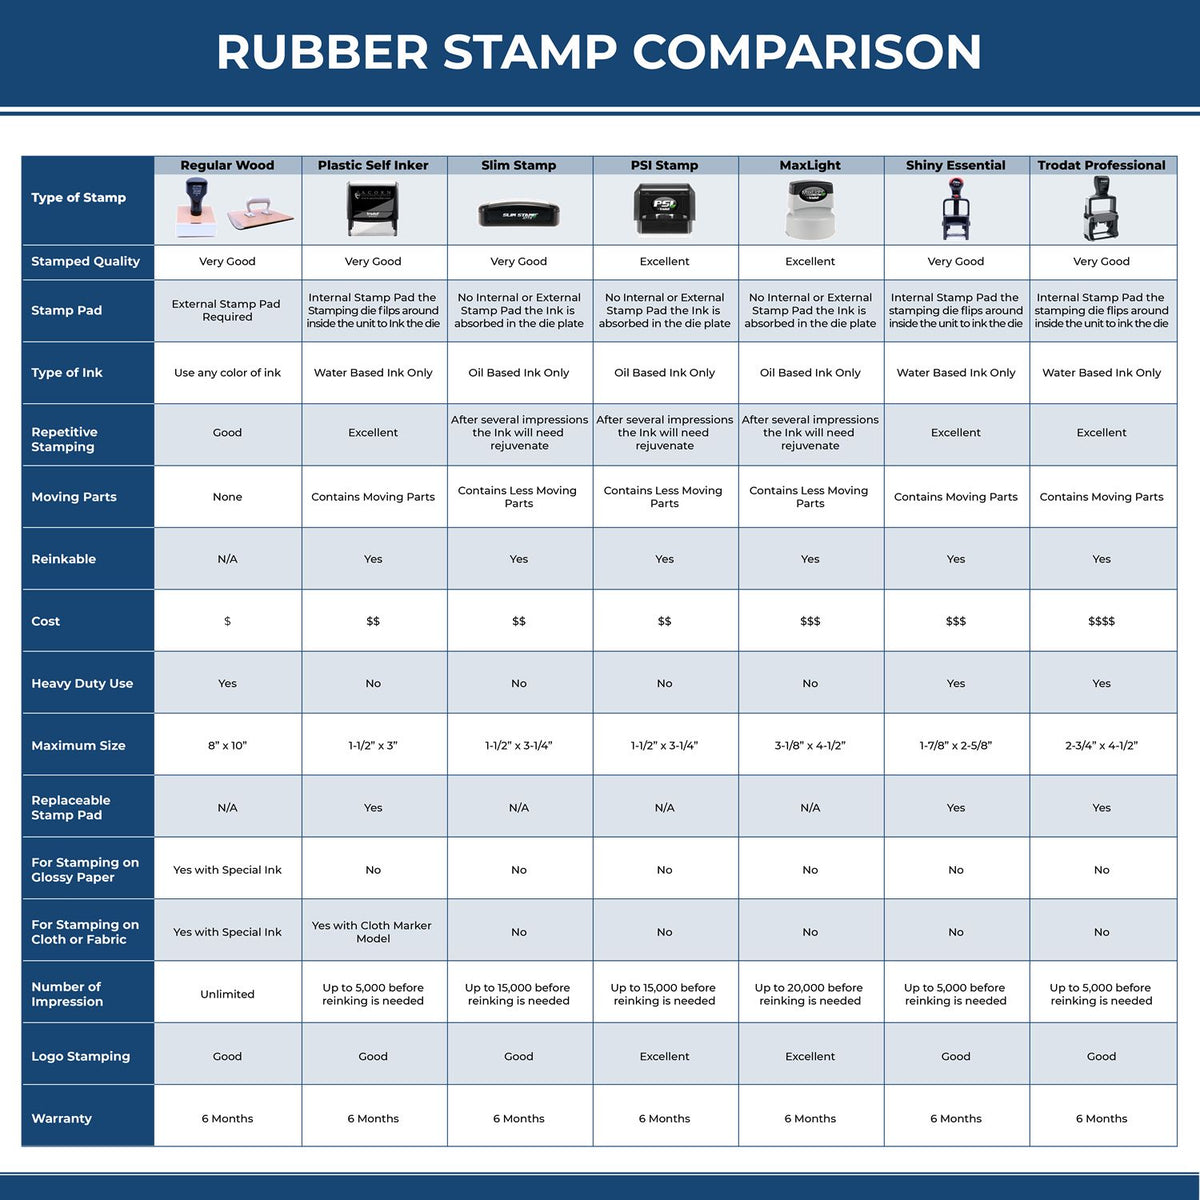 Large Pre-Inked Times Faxed Stamp 4857SLIM Rubber Stamp Comparison